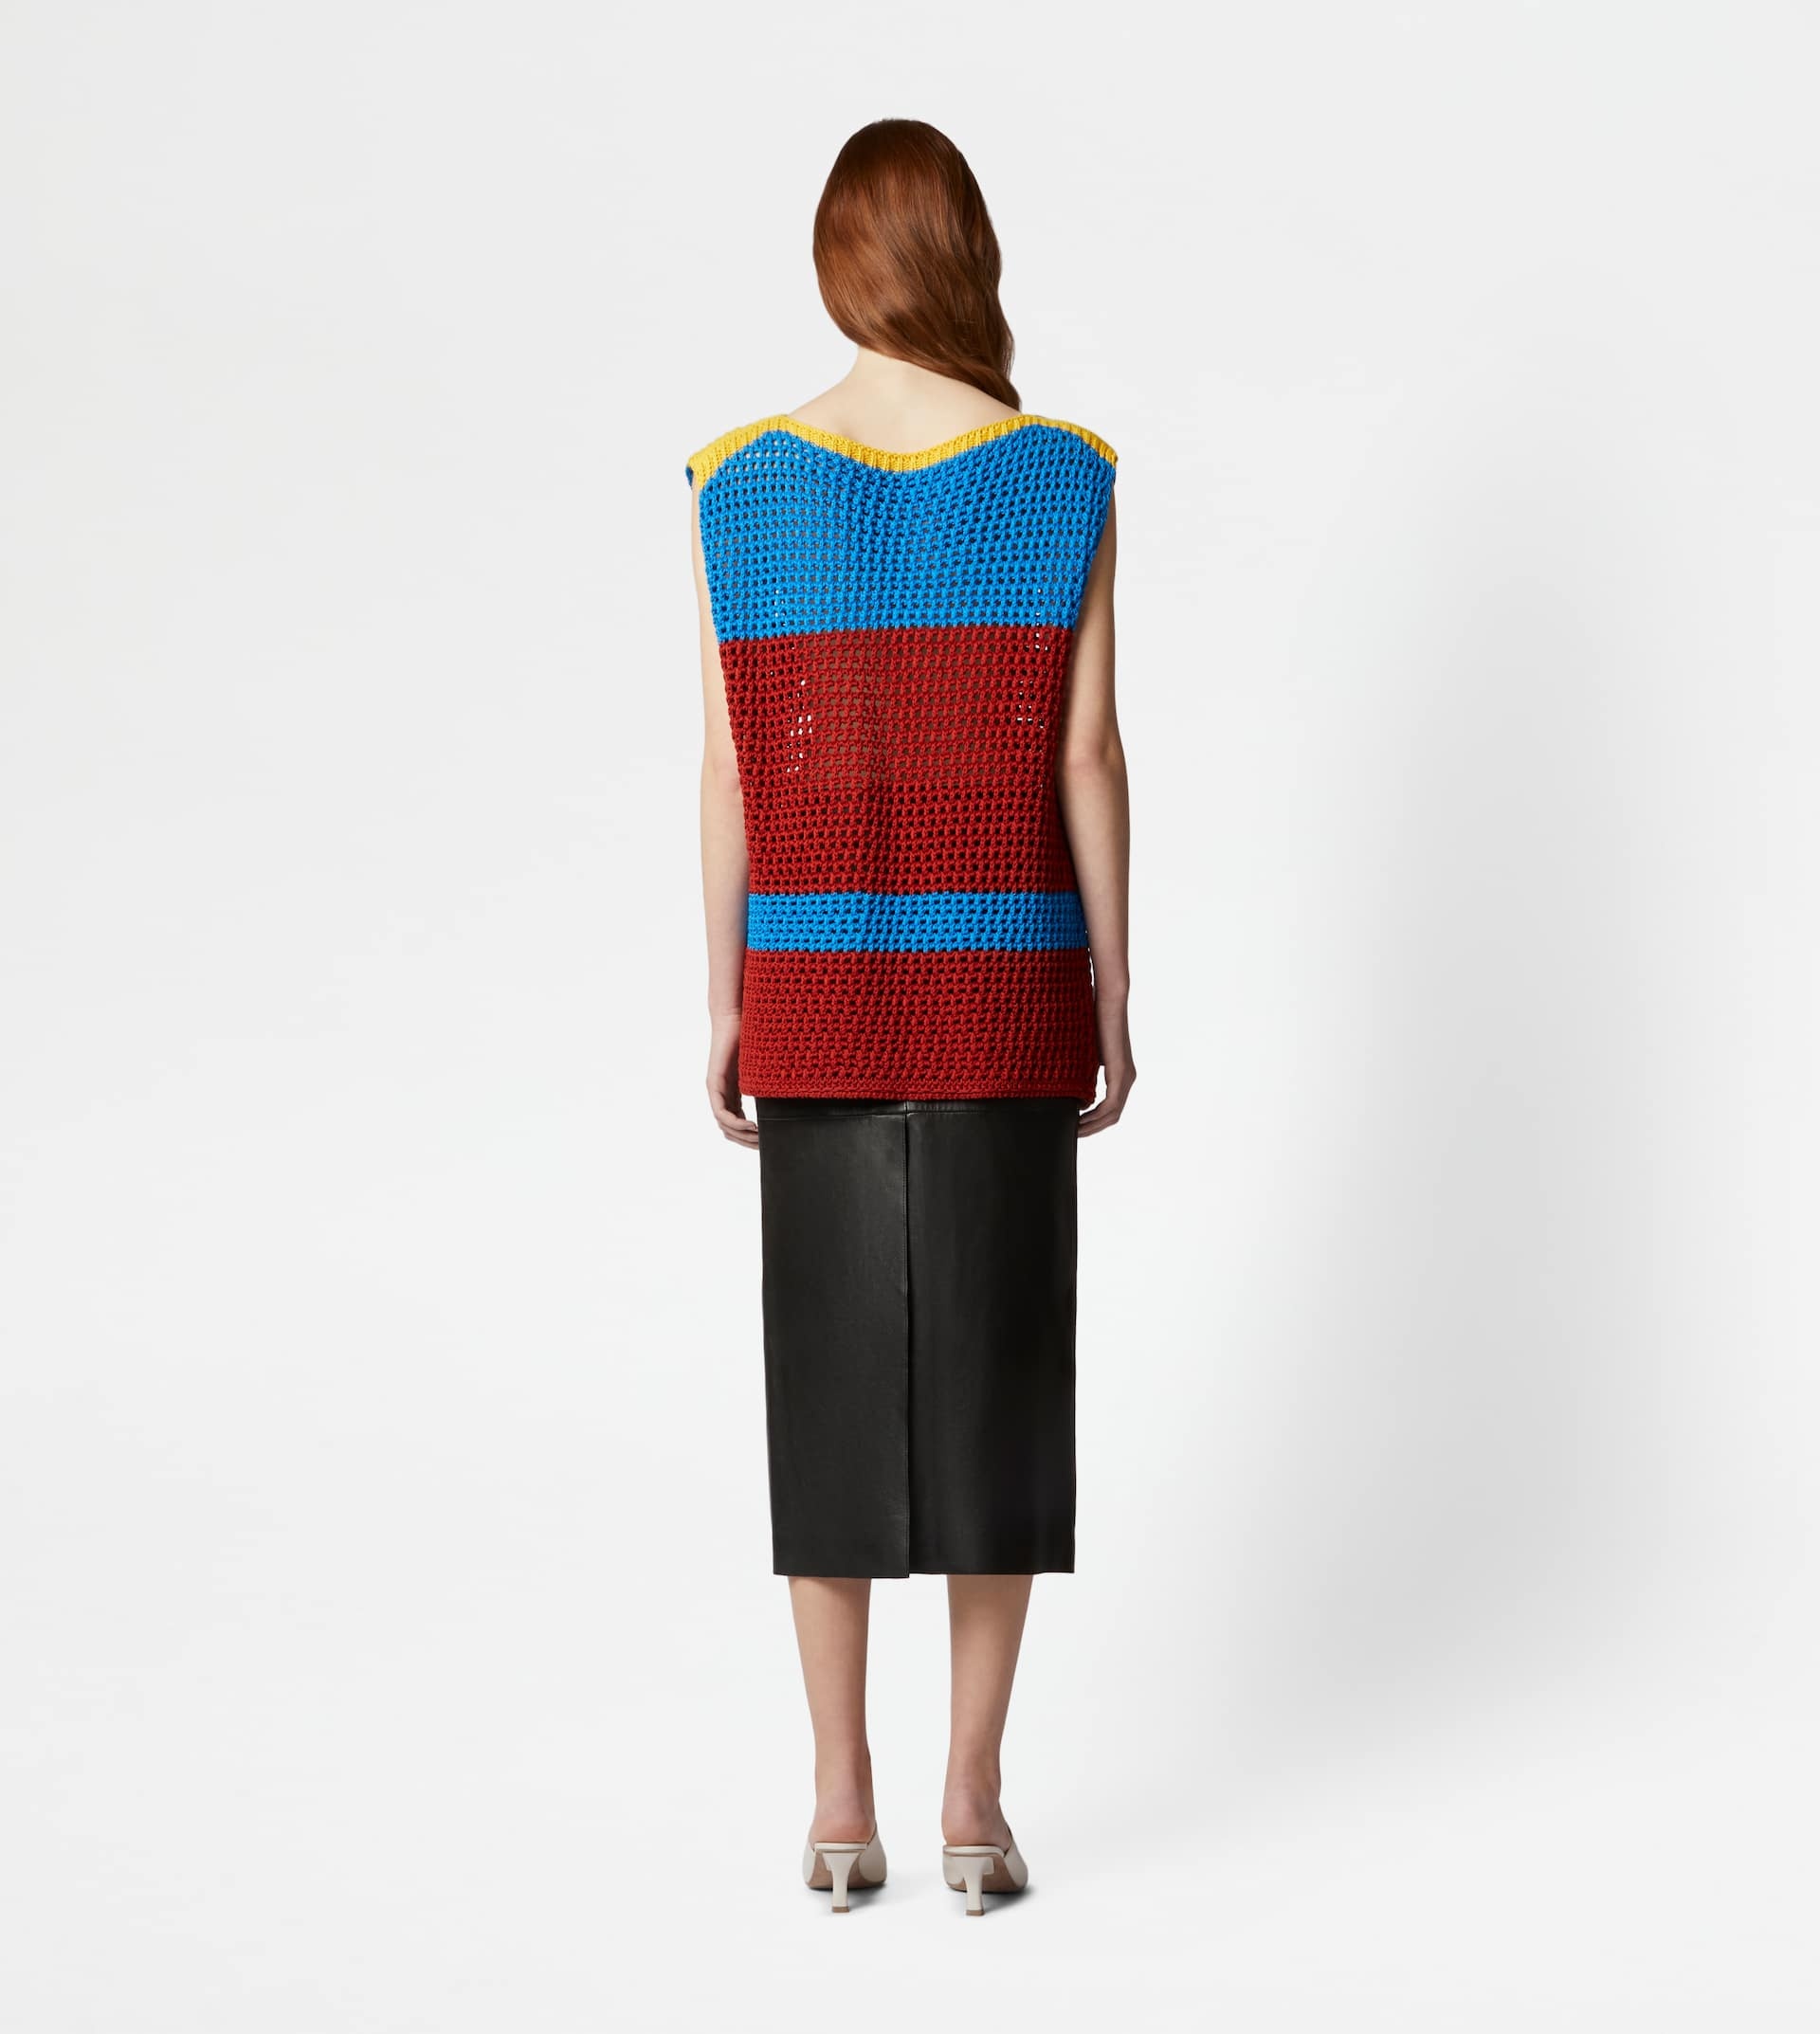 TOP IN COTTON KNIT - RED, LIGHT BLUE, YELLOW - 3